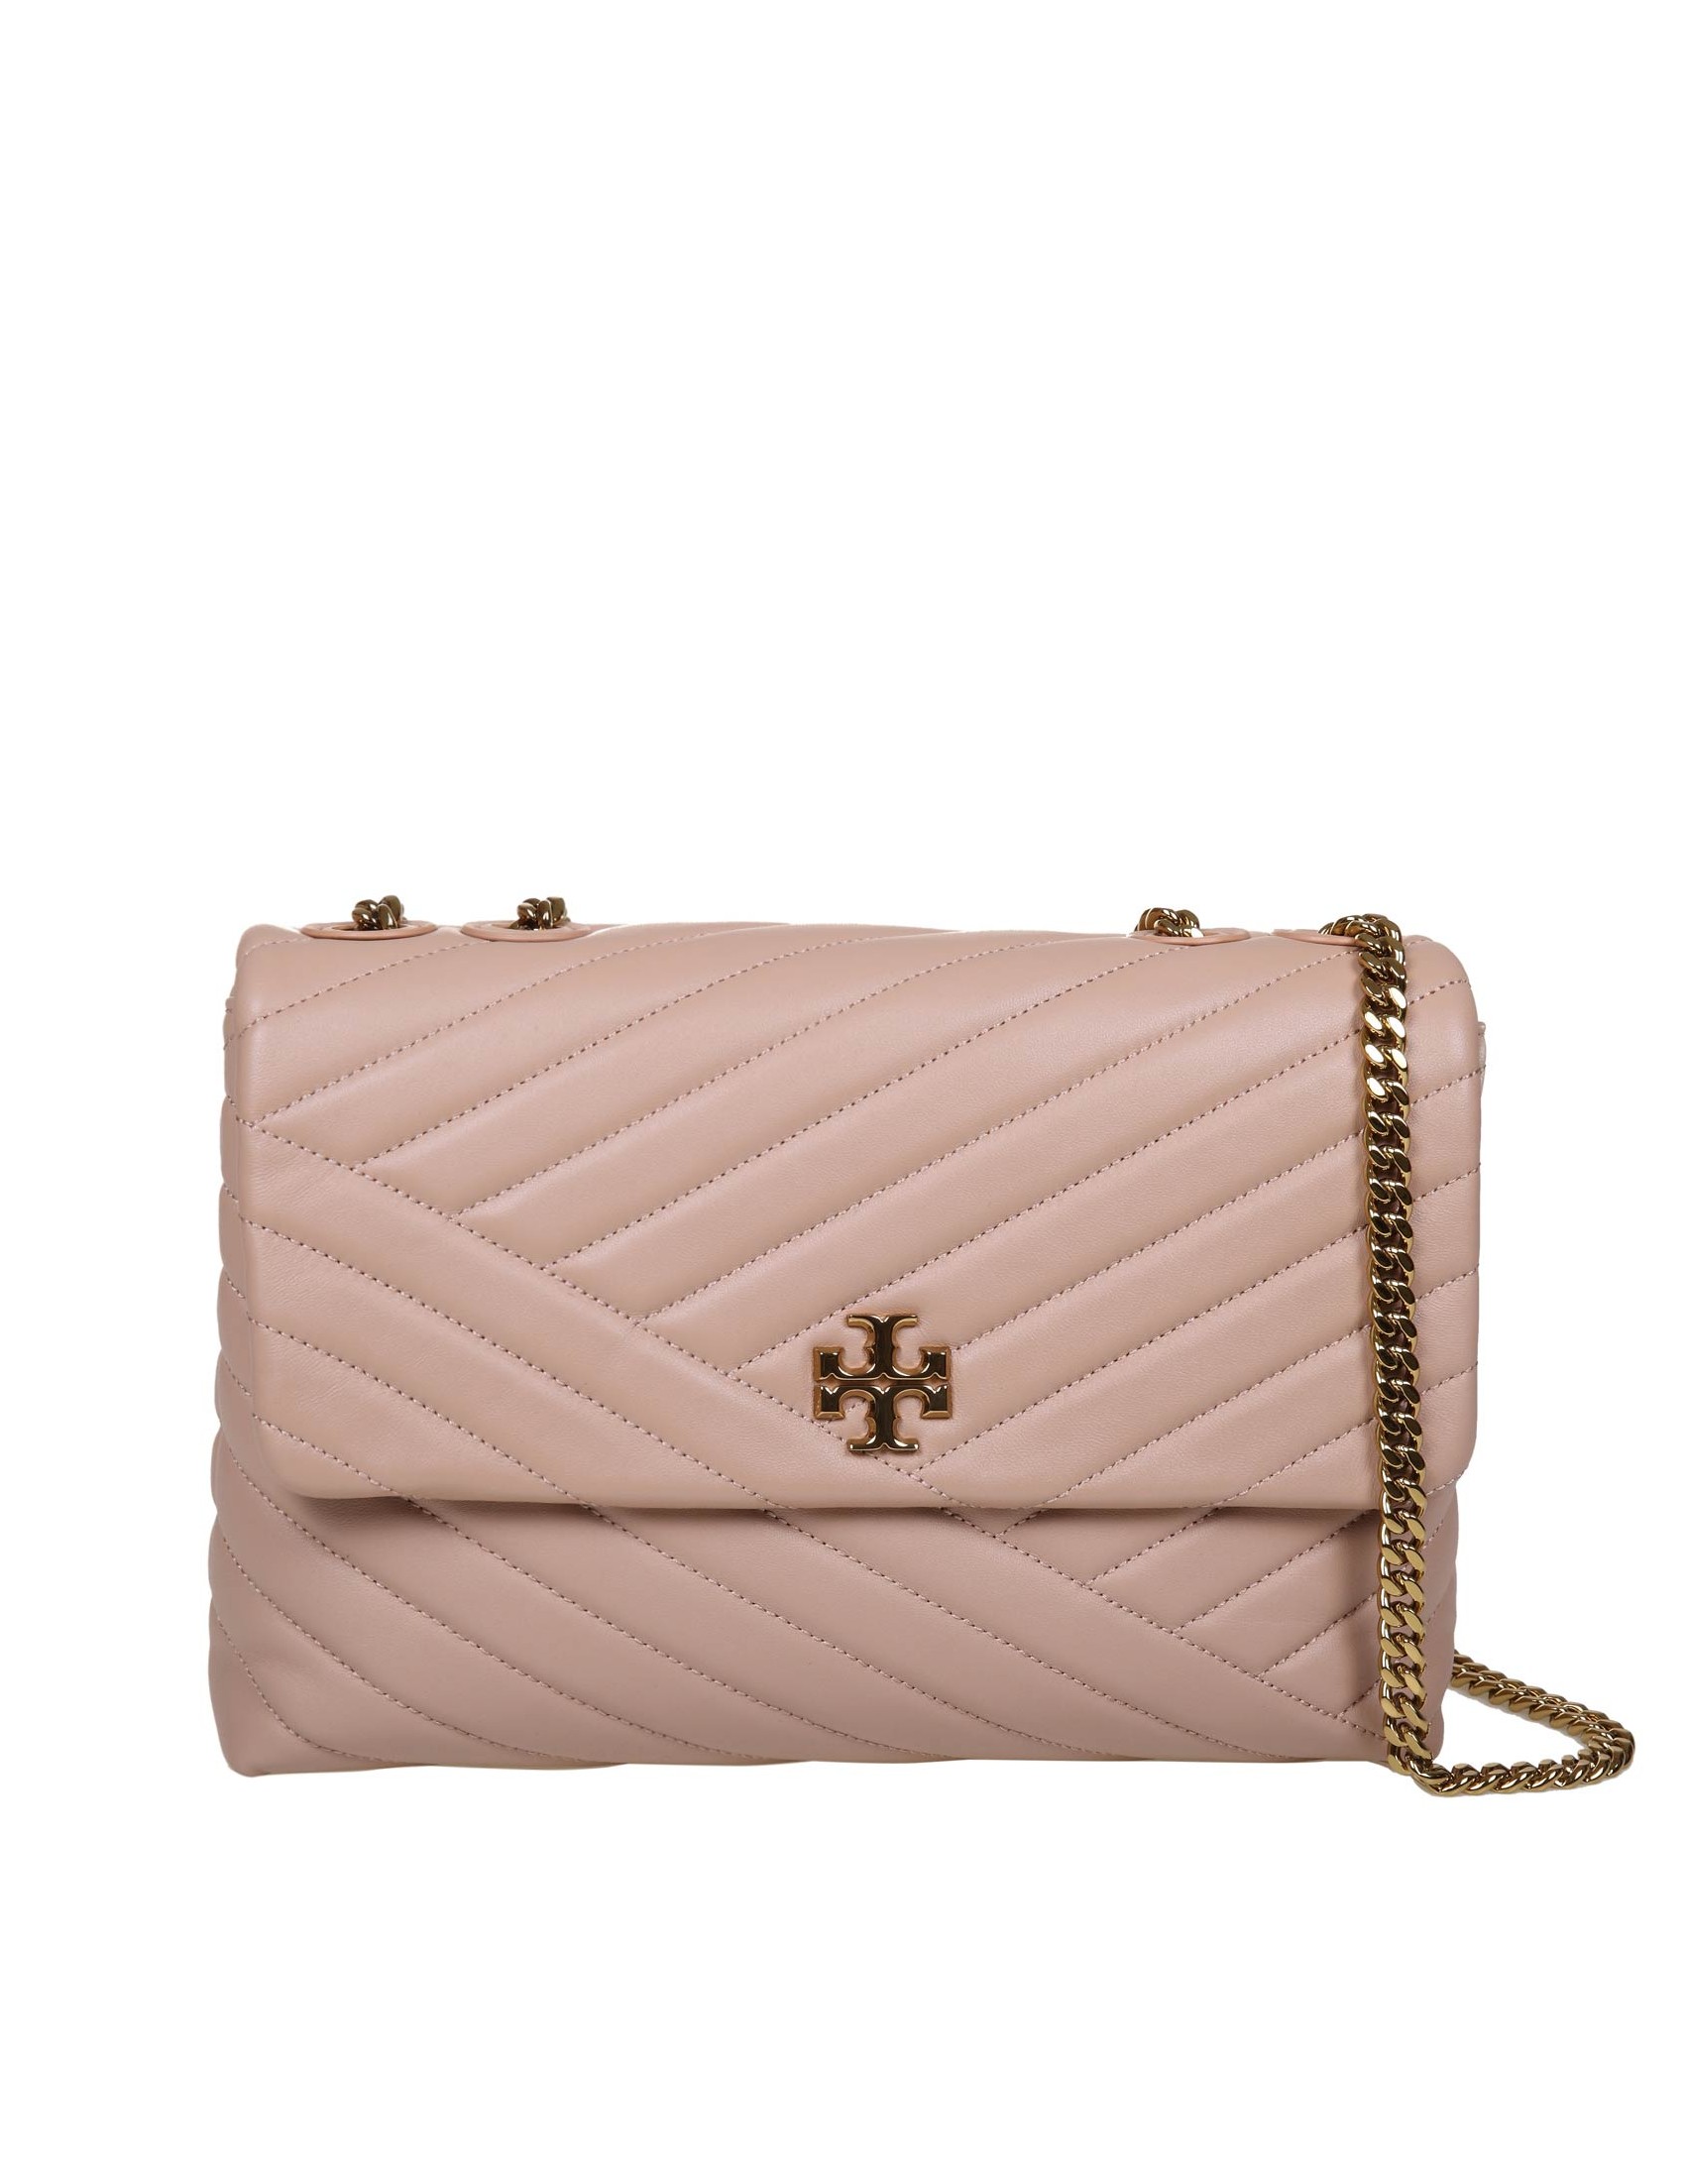 TORY BURCH KIRA SHOULDER BAG IN NUDE COLOR LEATHER